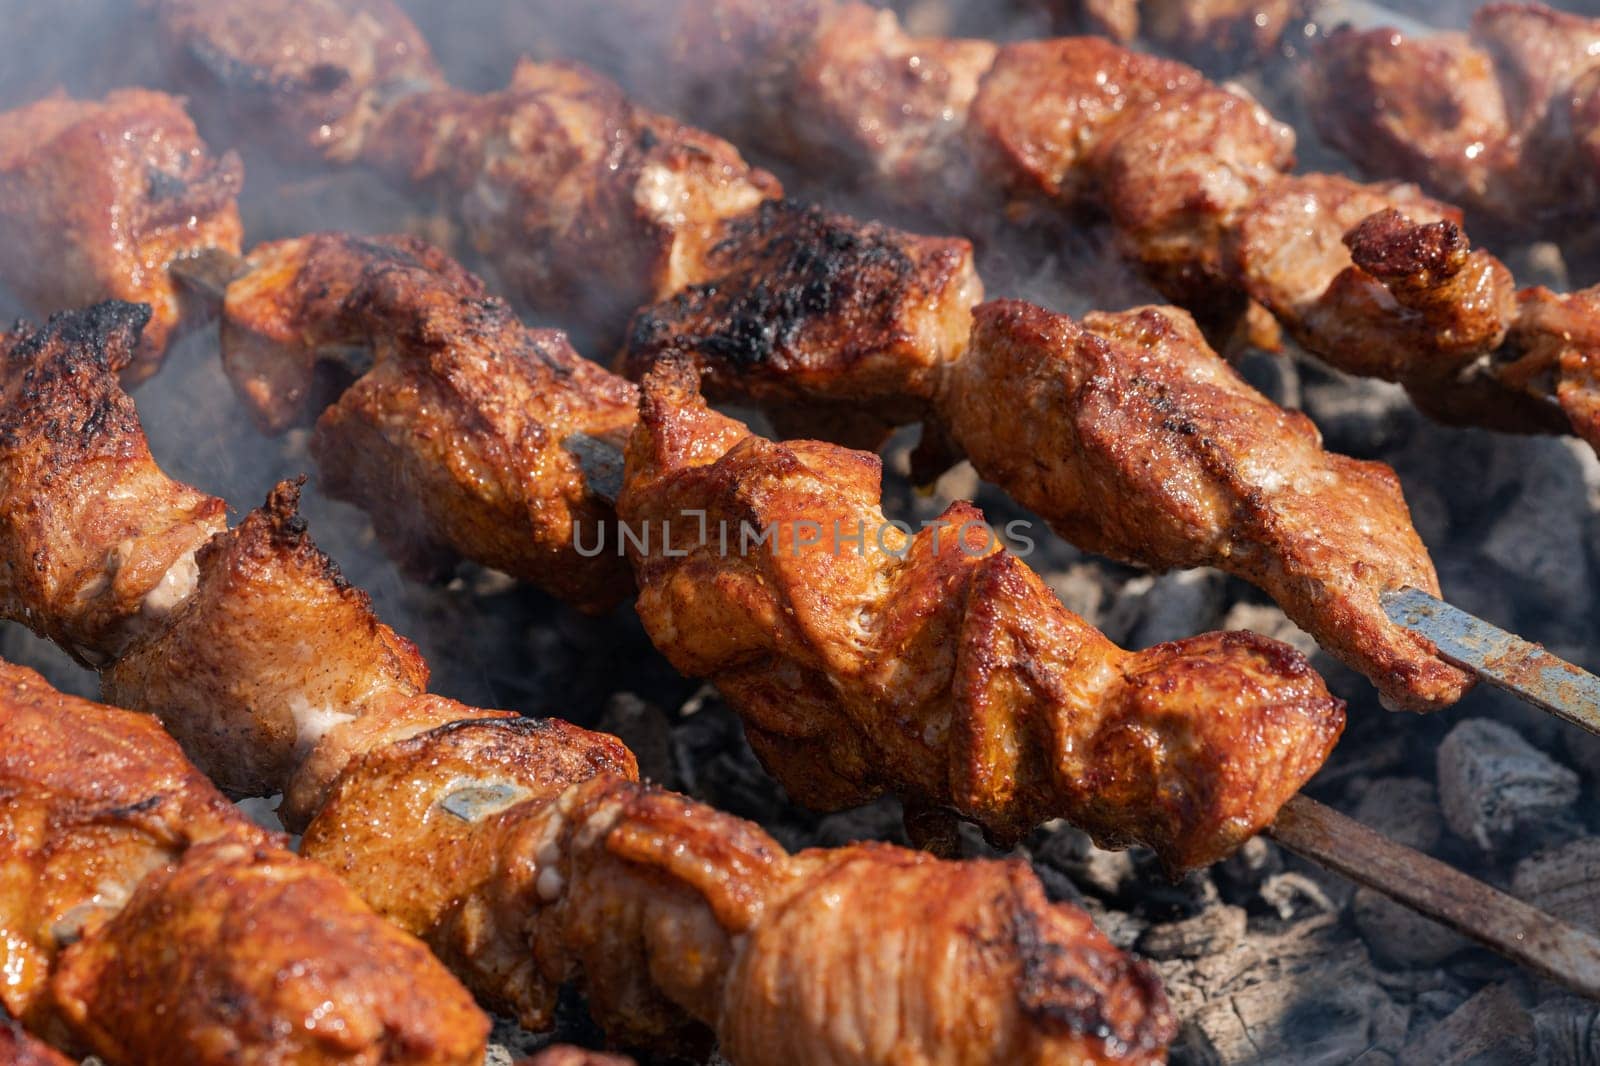 Tasty juicy pork barbecue cooking on metal skewers on charcoal outdoors grill with fragrant fire smoke. Cooking during summer picnic. Close-up view, selective focus on pieces of delicious roast meat.